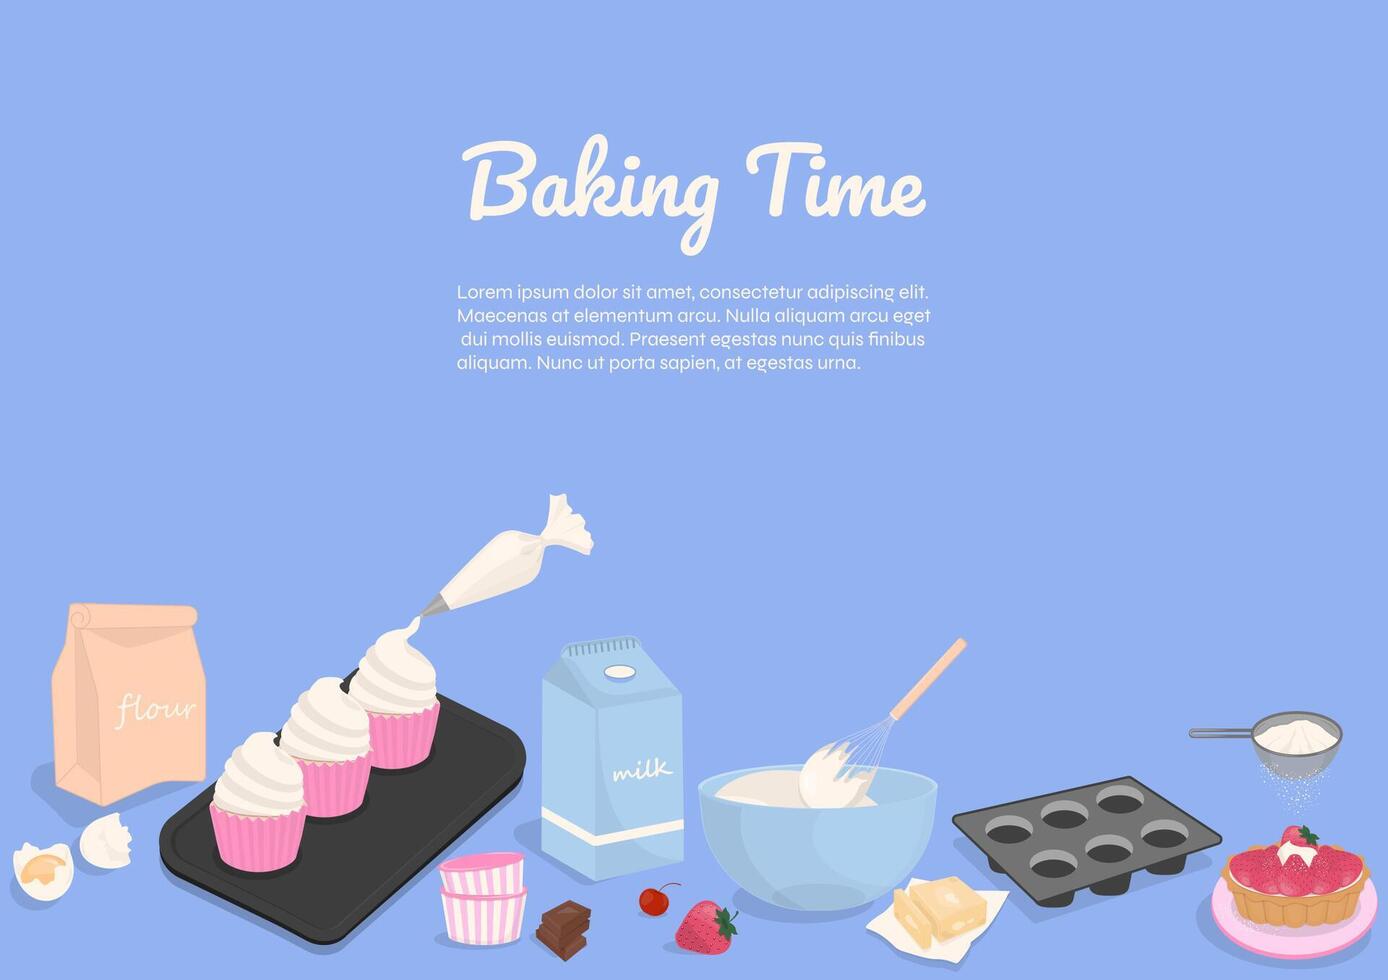 Cupcakes and baking utensils on blue background vector